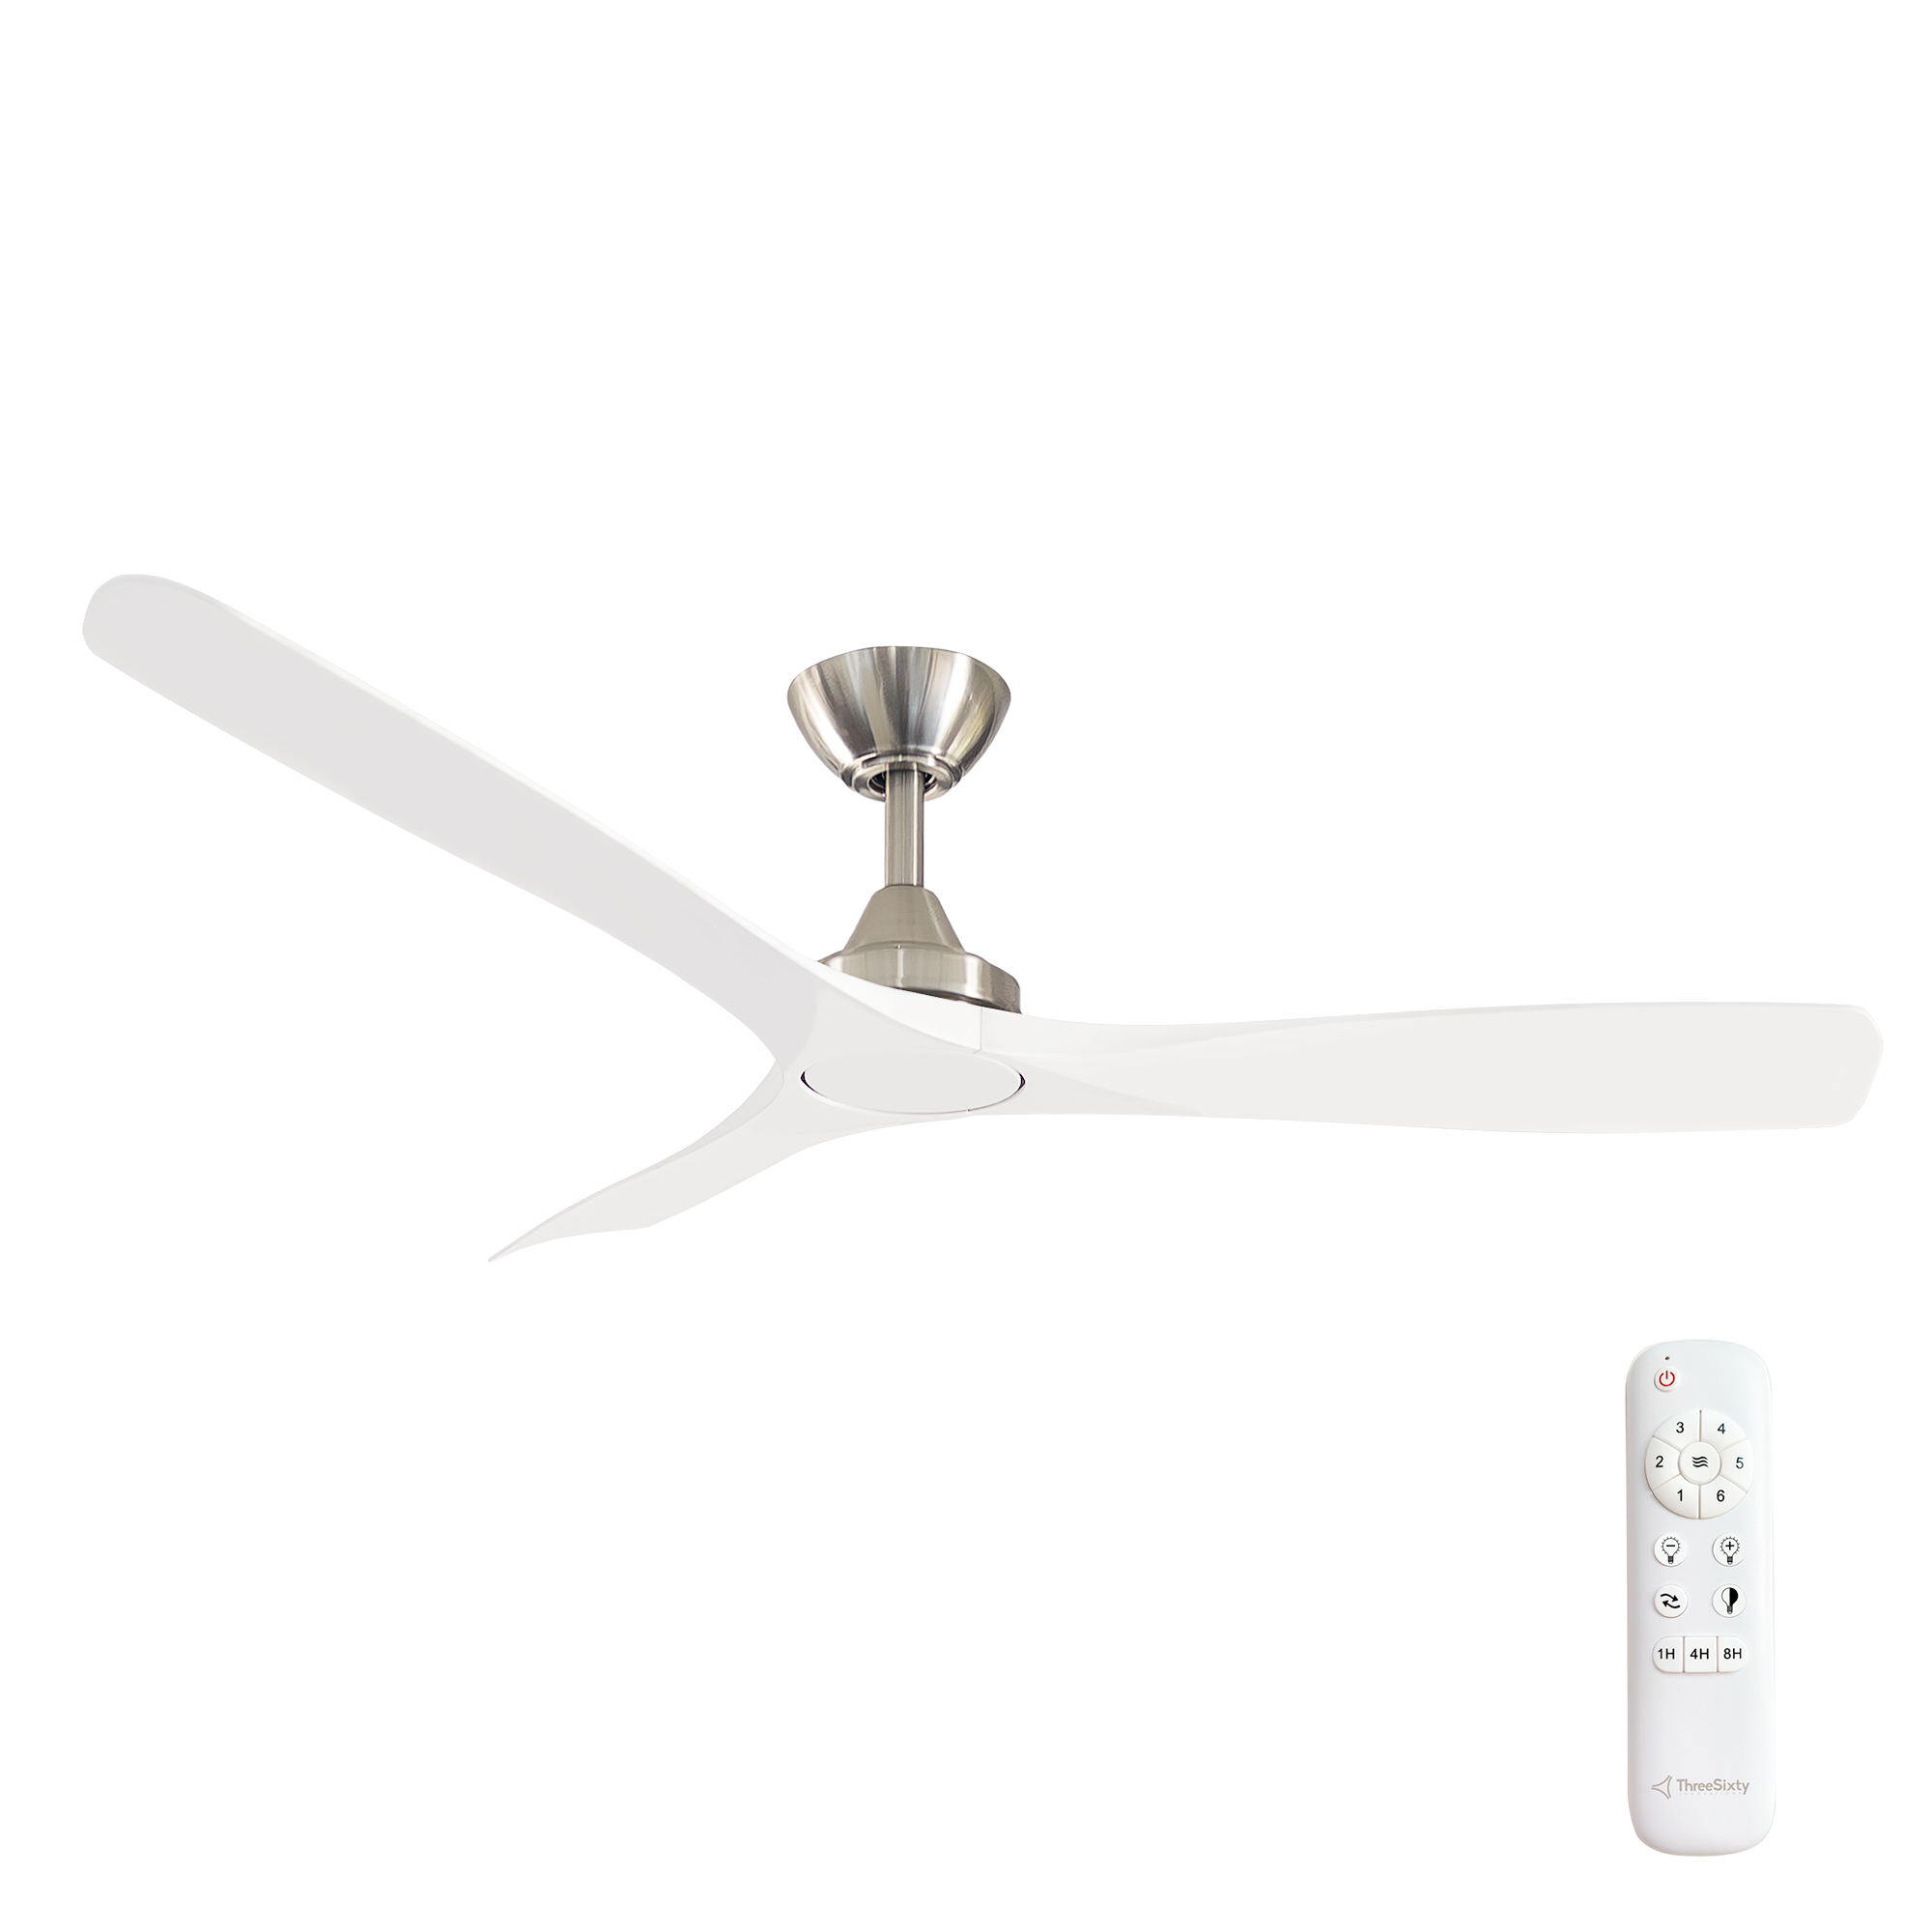 52" Spitfire DC Ceiling Fan in Brushed Nickel with White blades